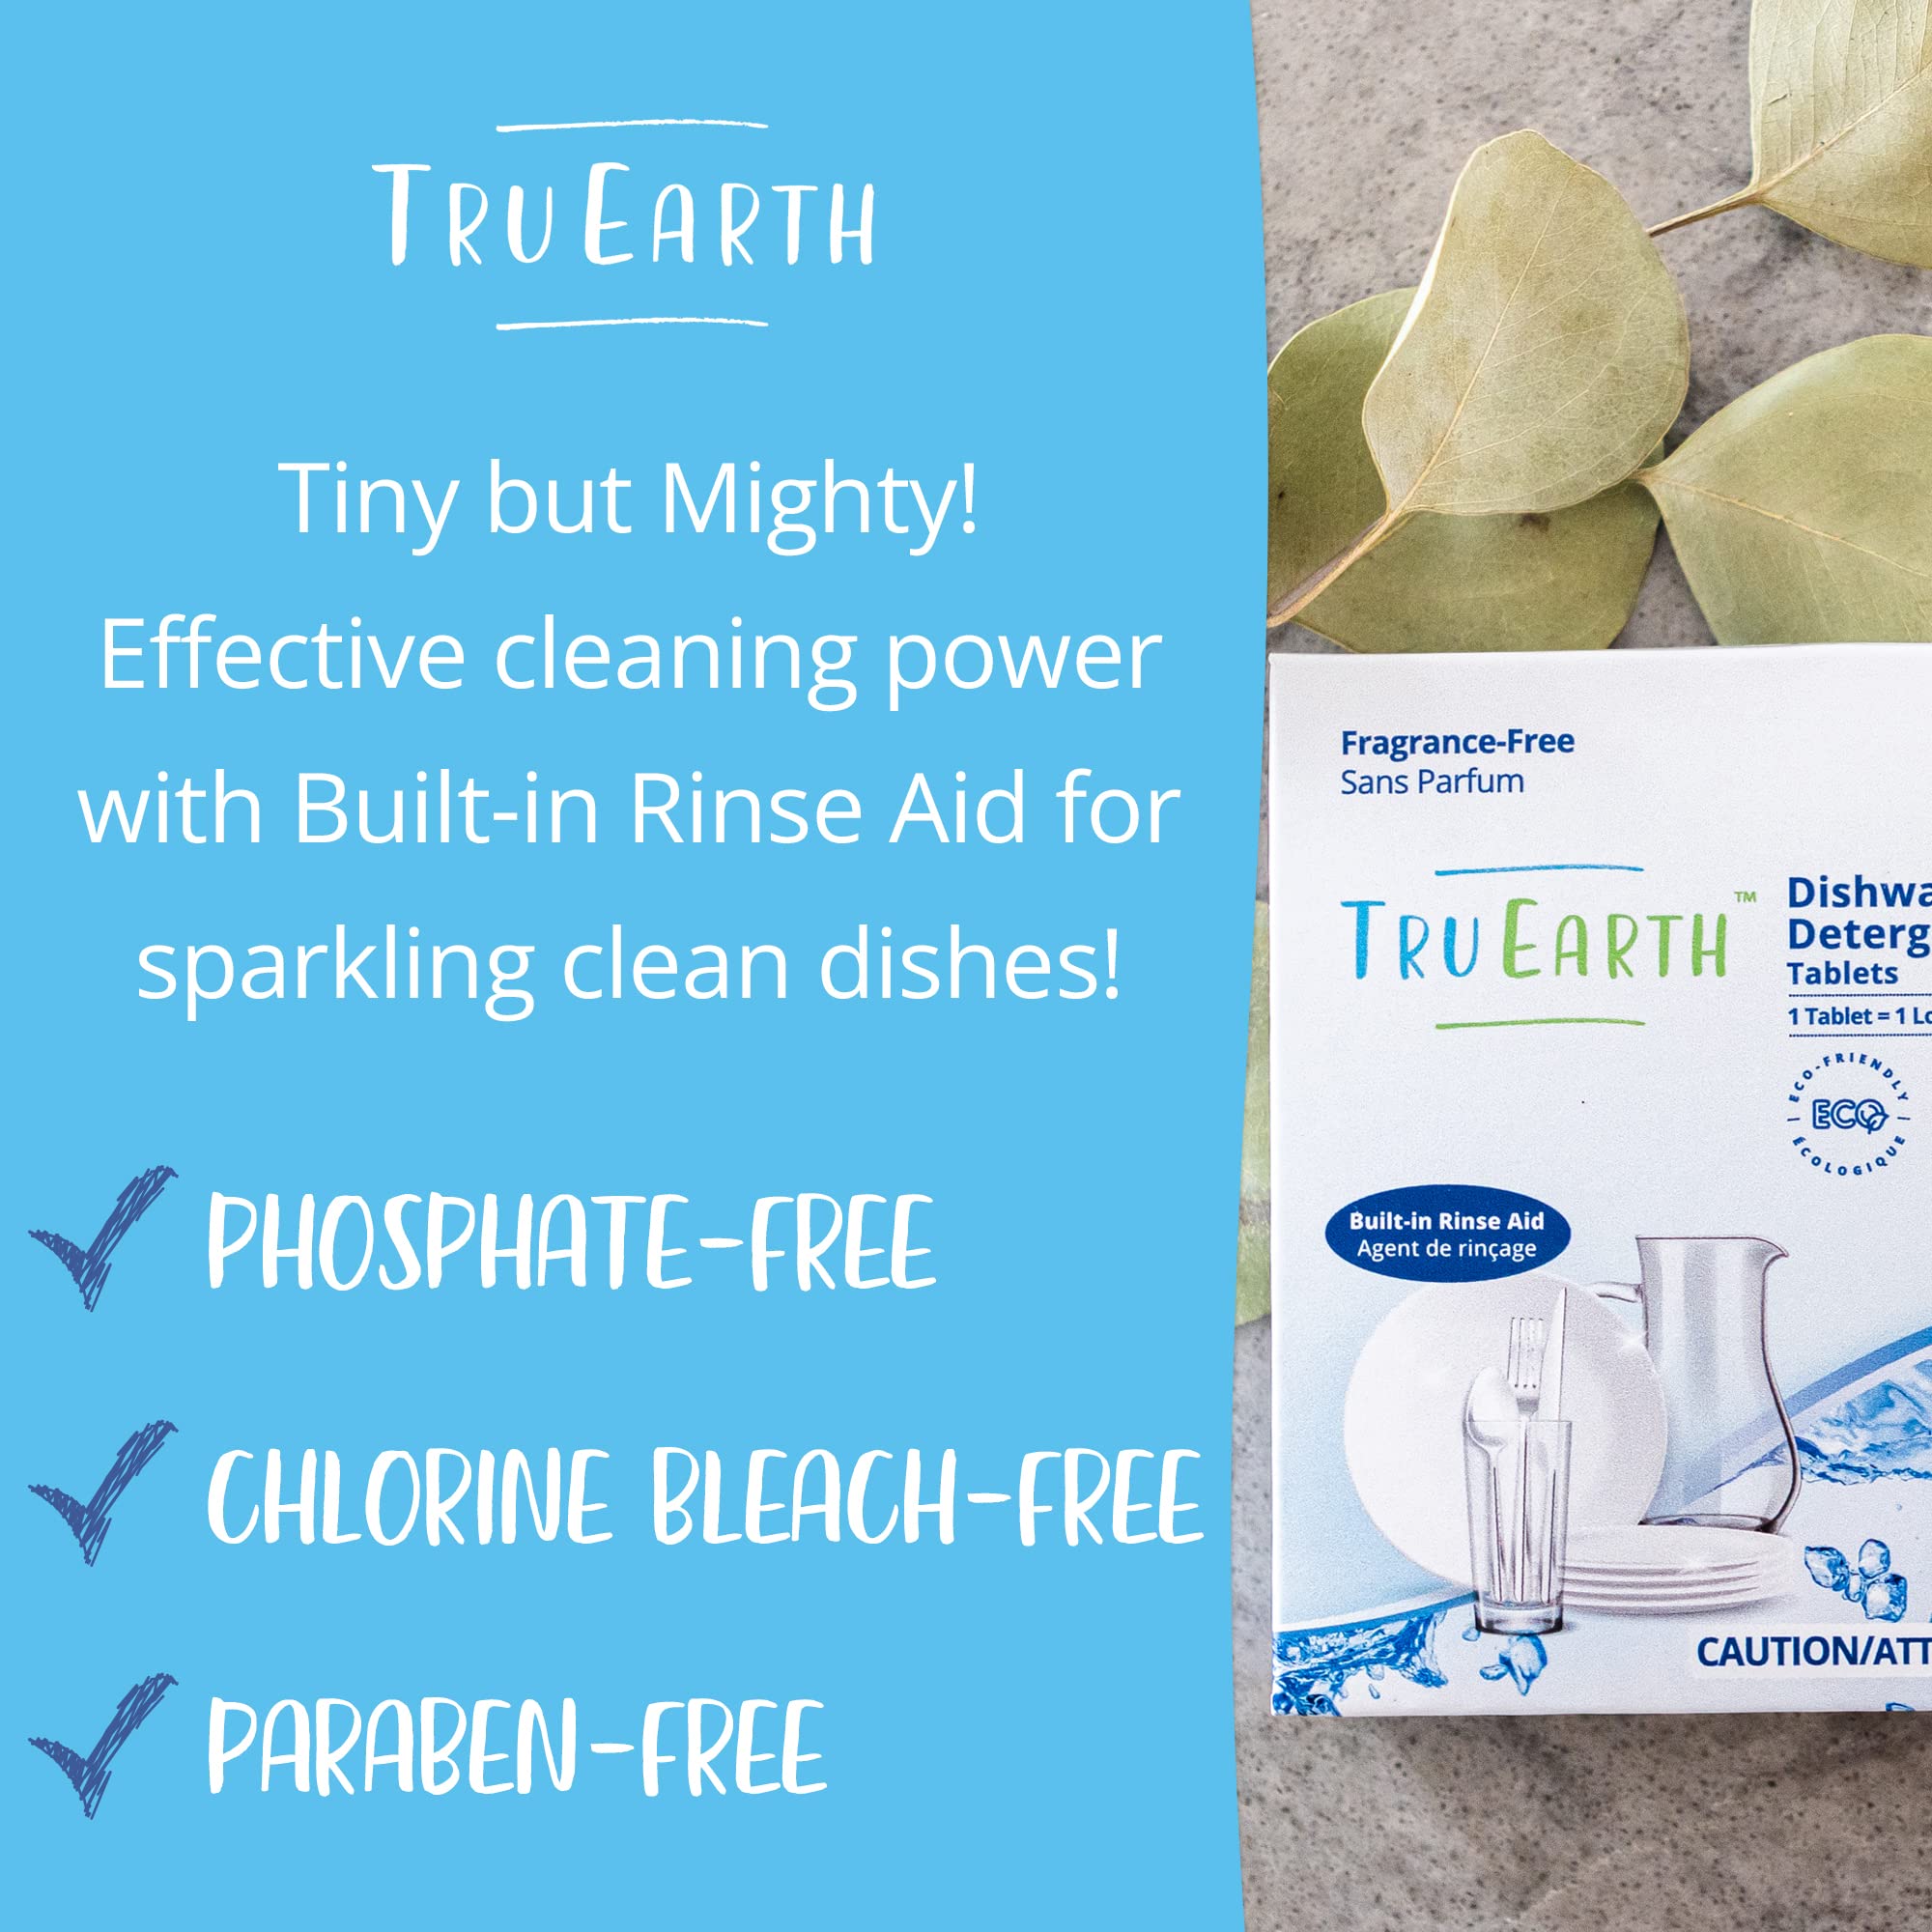 Tru Earth Dishwasher Detergent Tablets | Plastic-Free, Lab-Tested Dishwasher Packs | Super Concentrated and Easy to Use | 30 Tablets